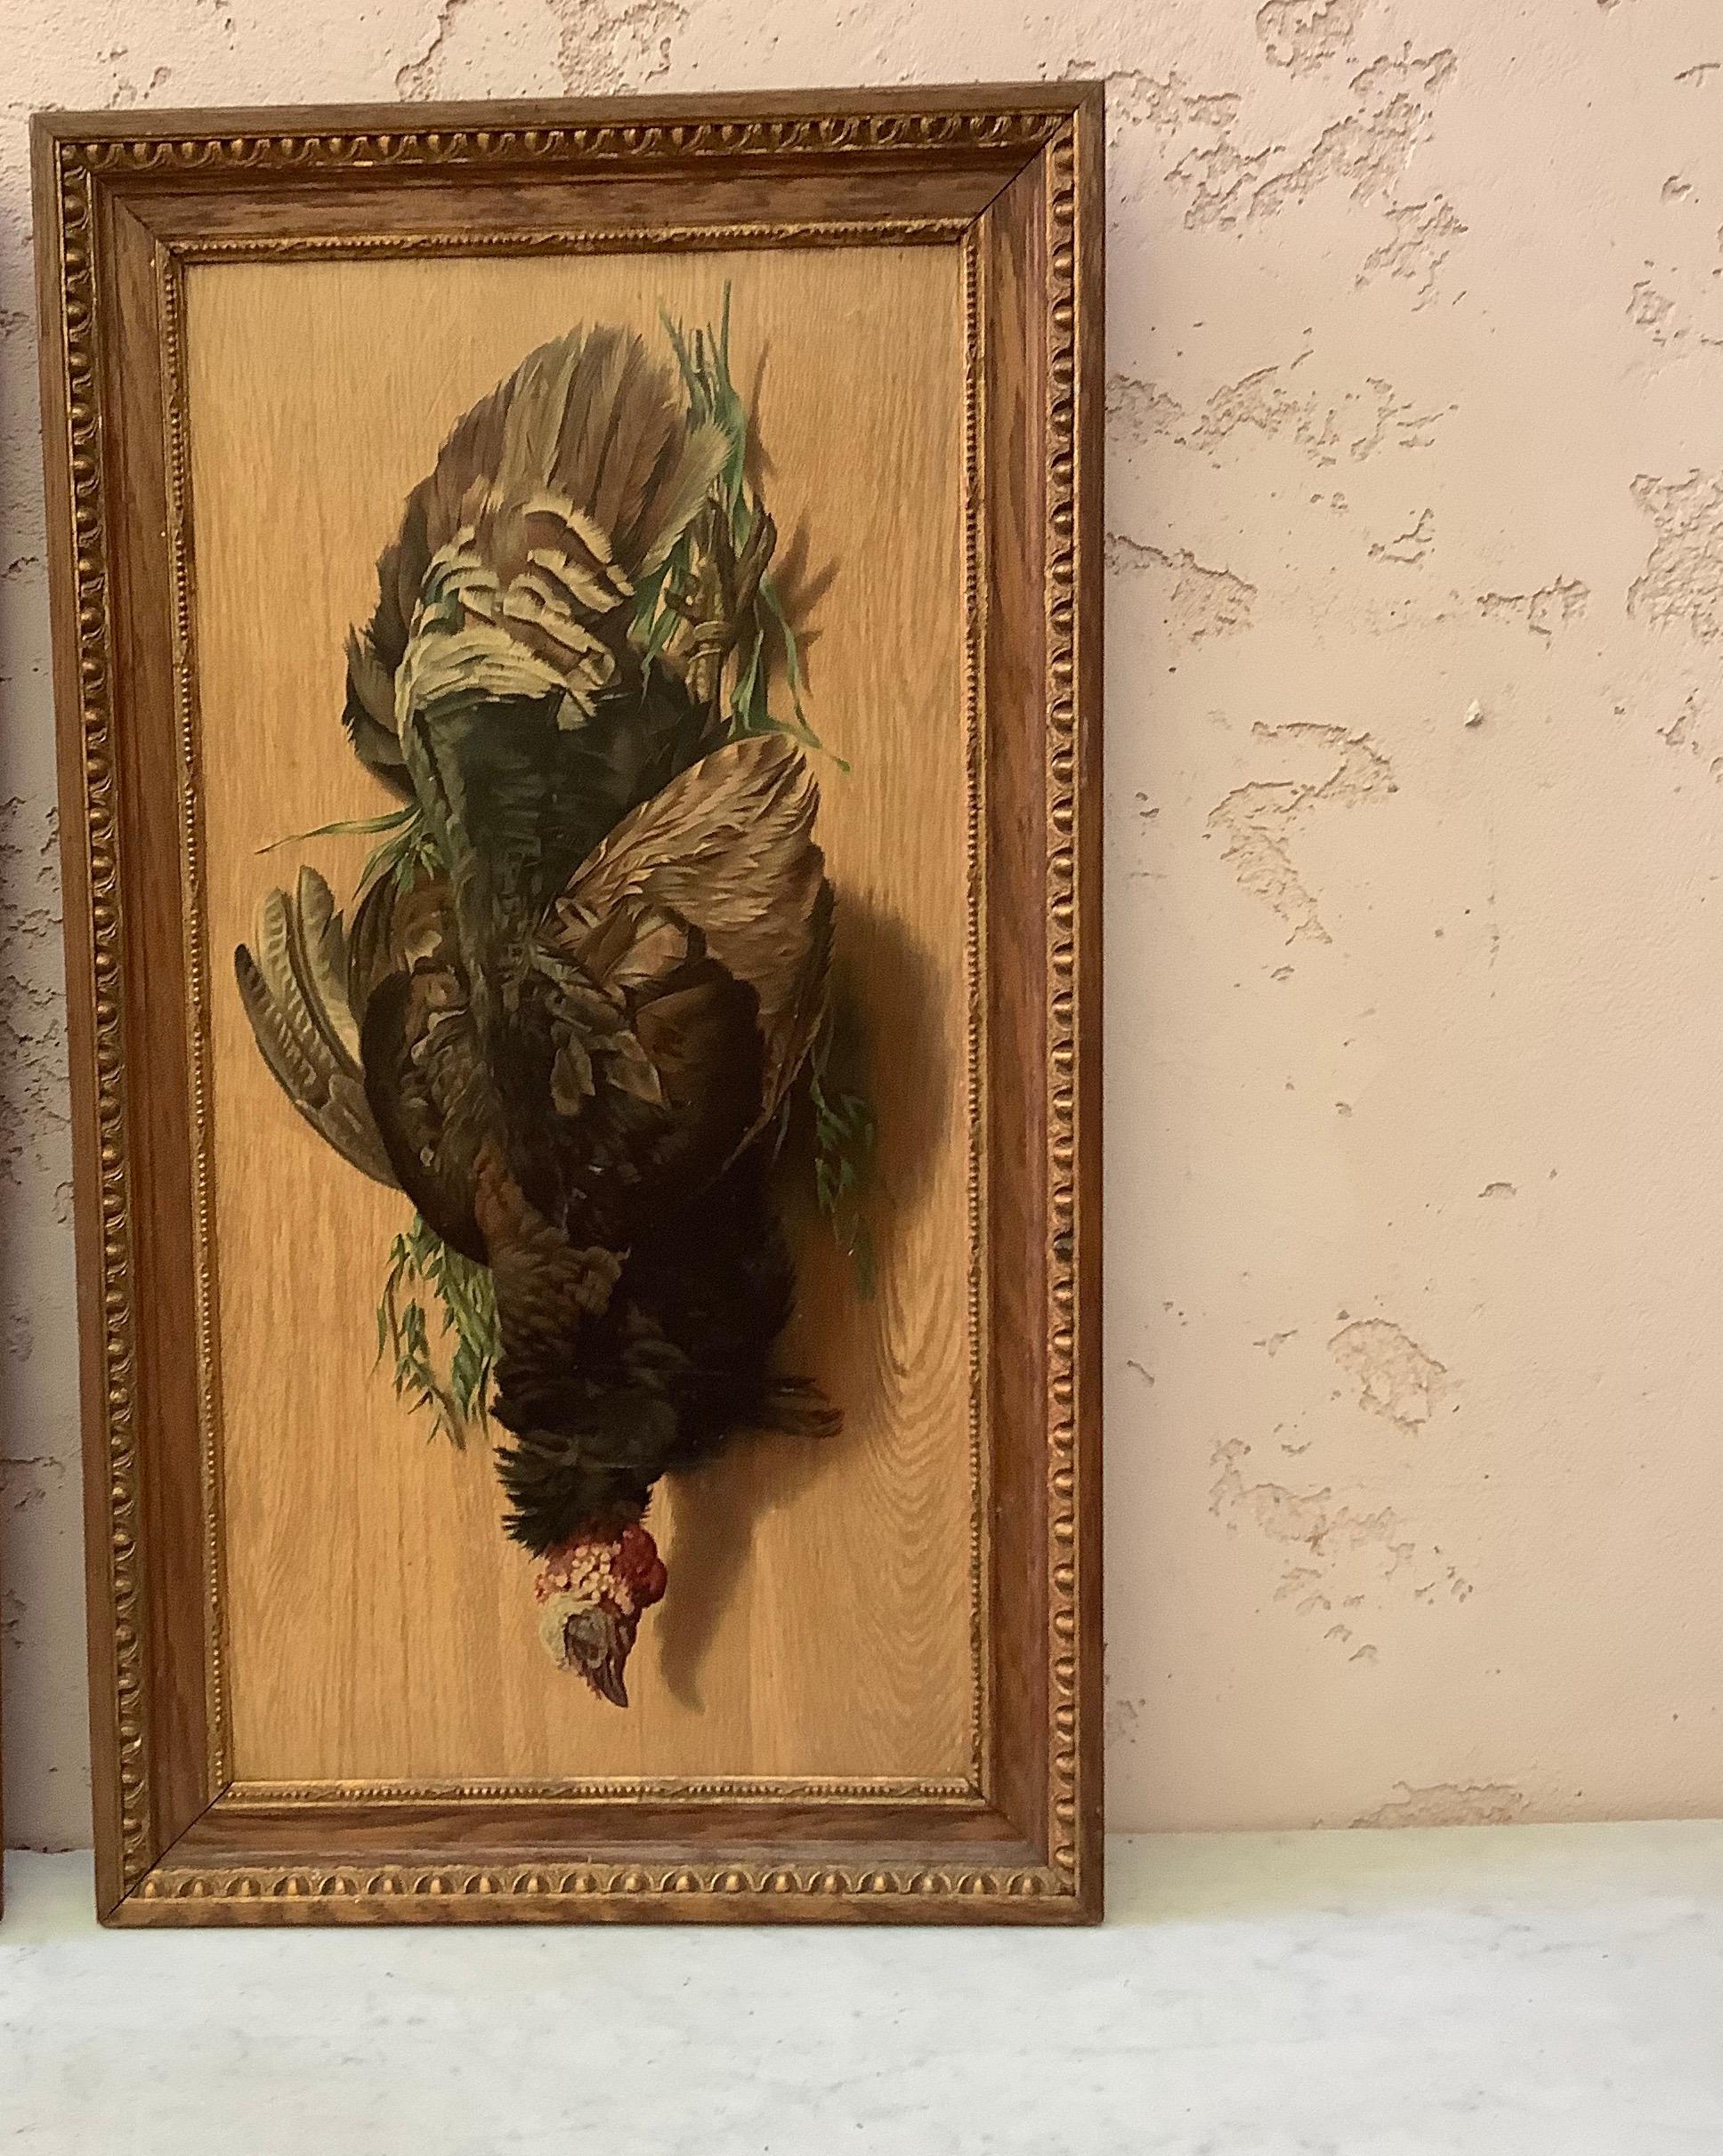 Large French chromolithograph print with a turkey hunting trophy attached with plants, circa 1890.
Very well framed in oak wood with gold borders.
Perfect for lake house or cabin.